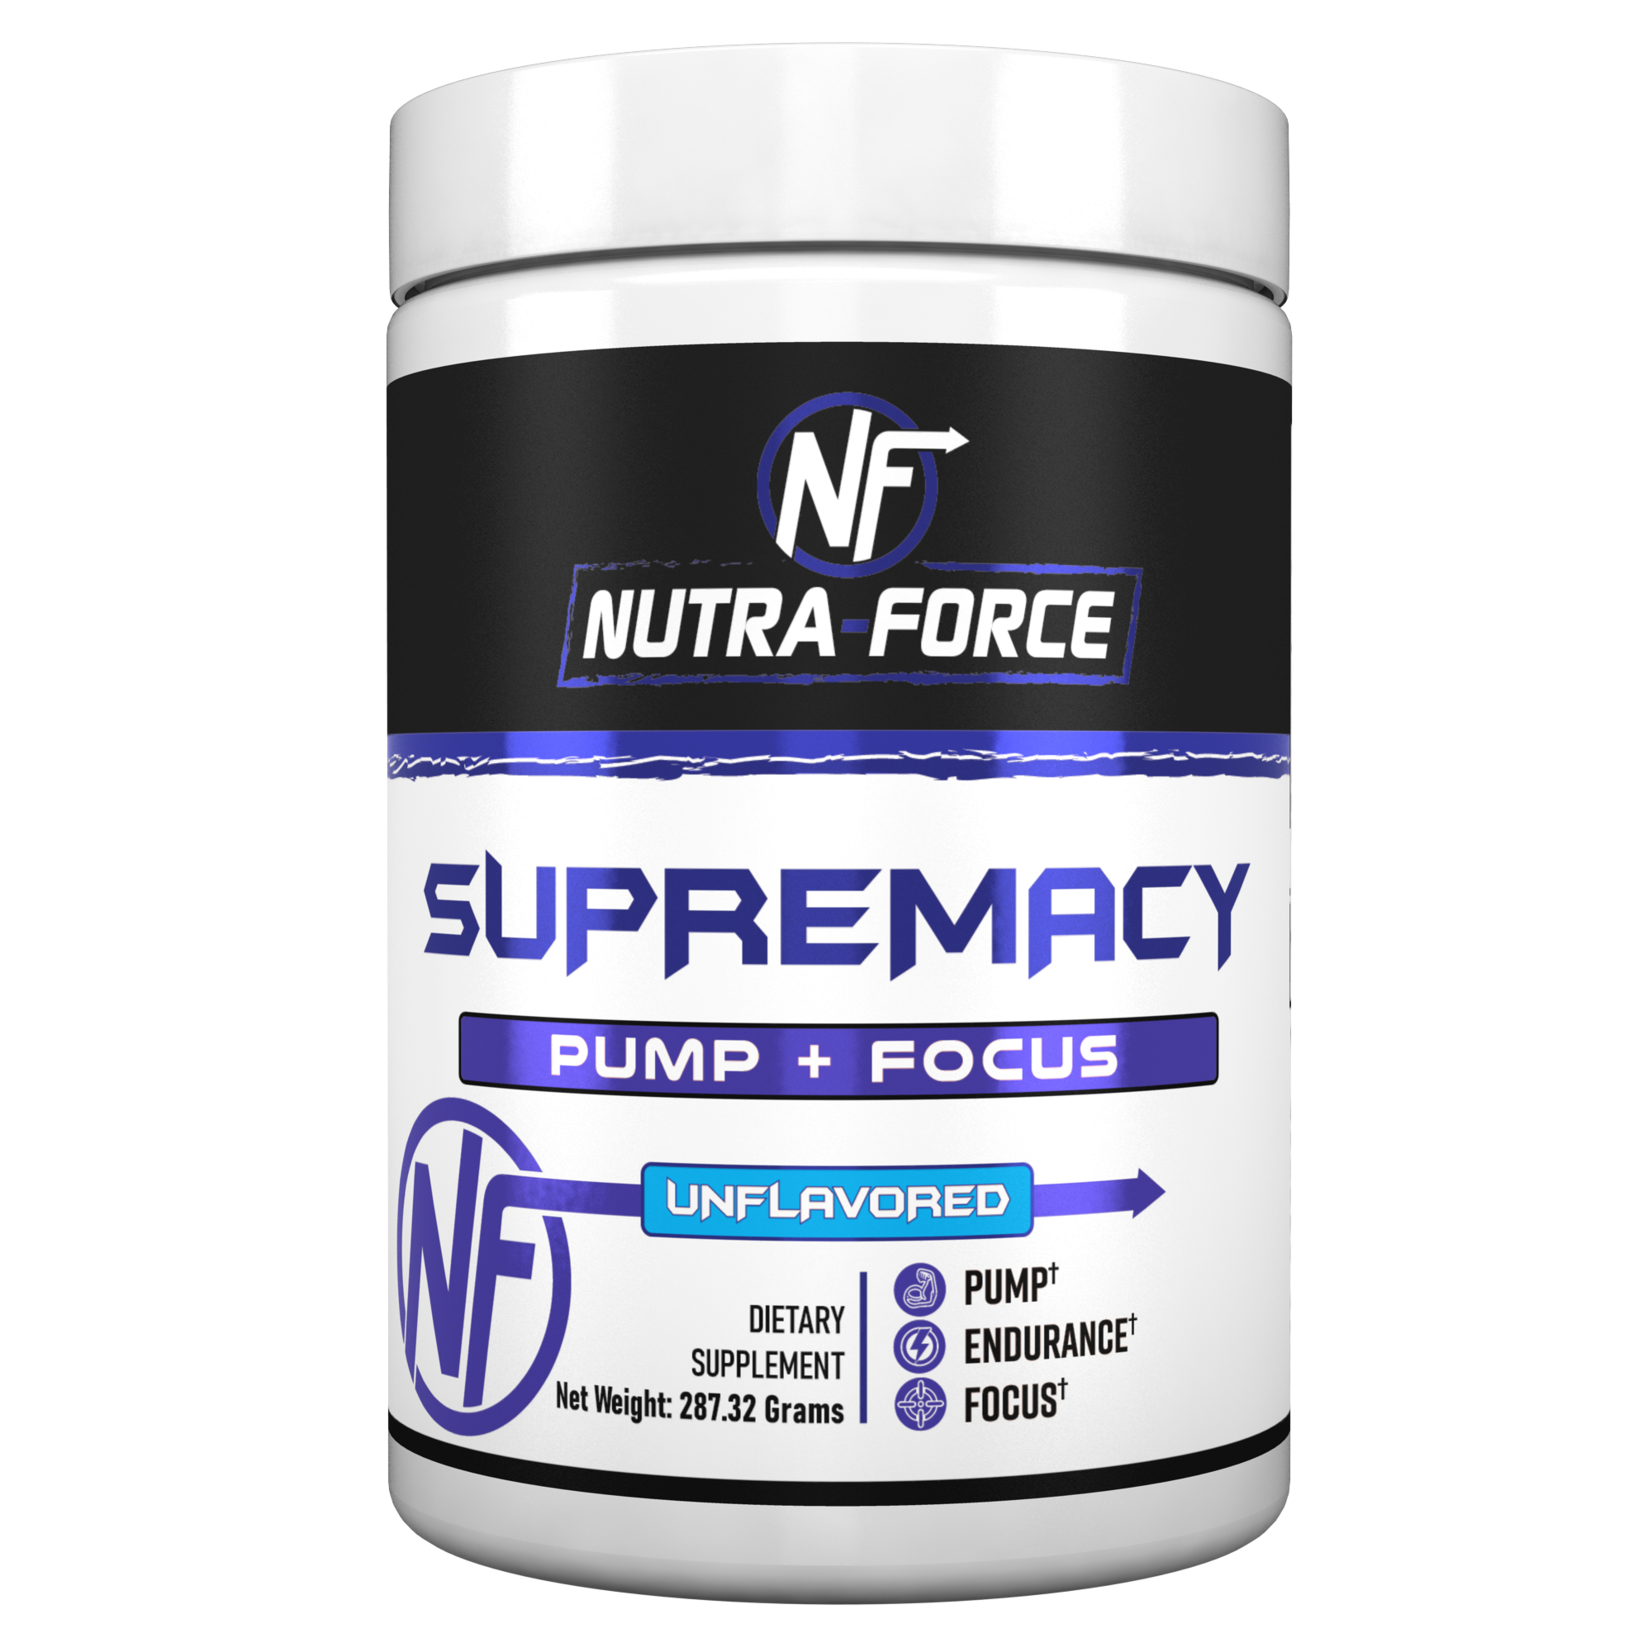 Nutra Force Supremacy